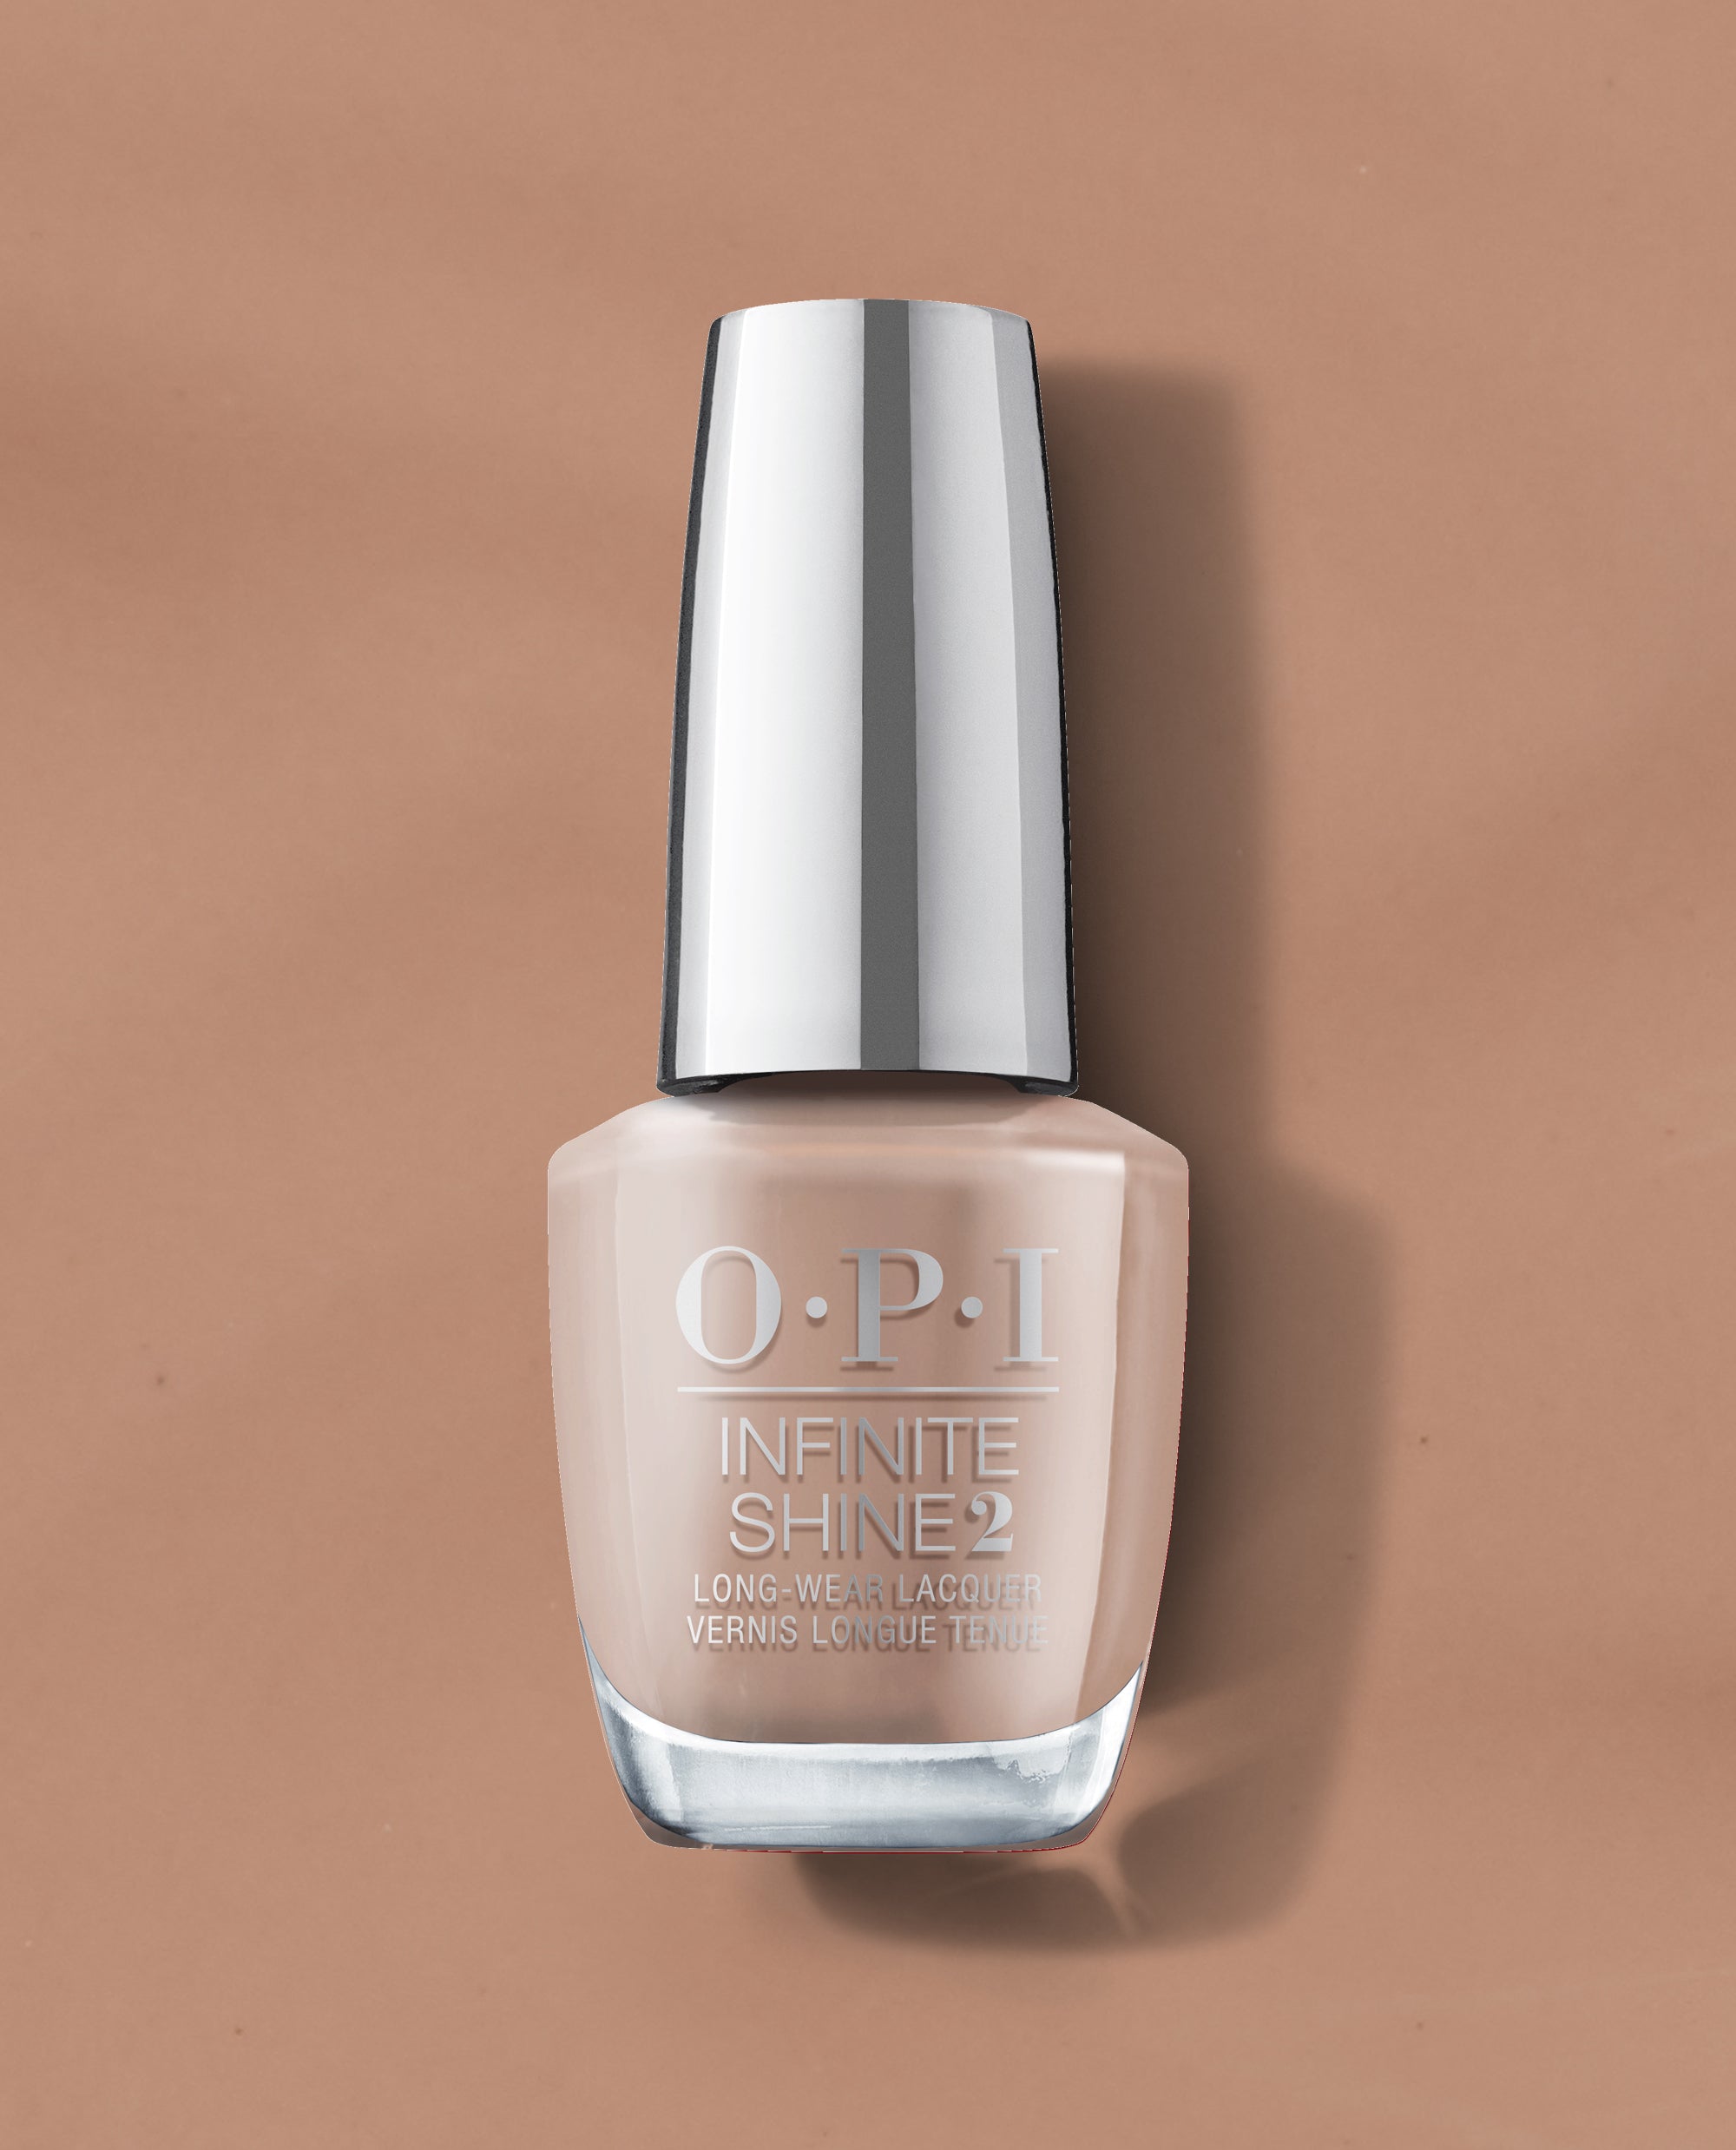 O.P.I Nail Paint Mini (Got the Blues for Red) Price - Buy Online at Best  Price in India